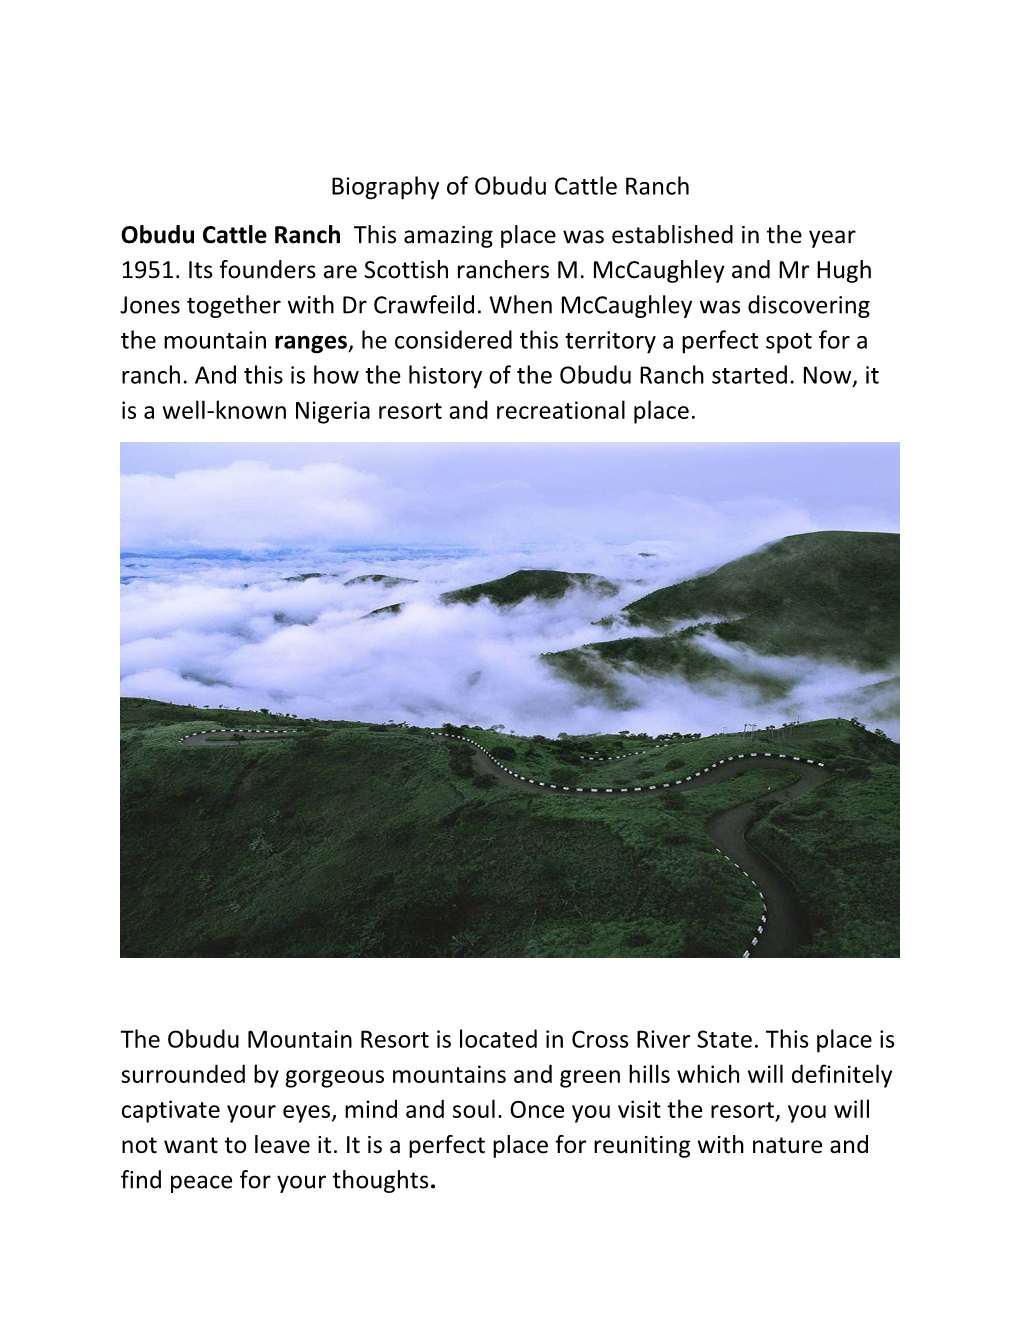 Biography of Obudu Cattle Ranch Obudu Cattle Ranch This Amazing Place